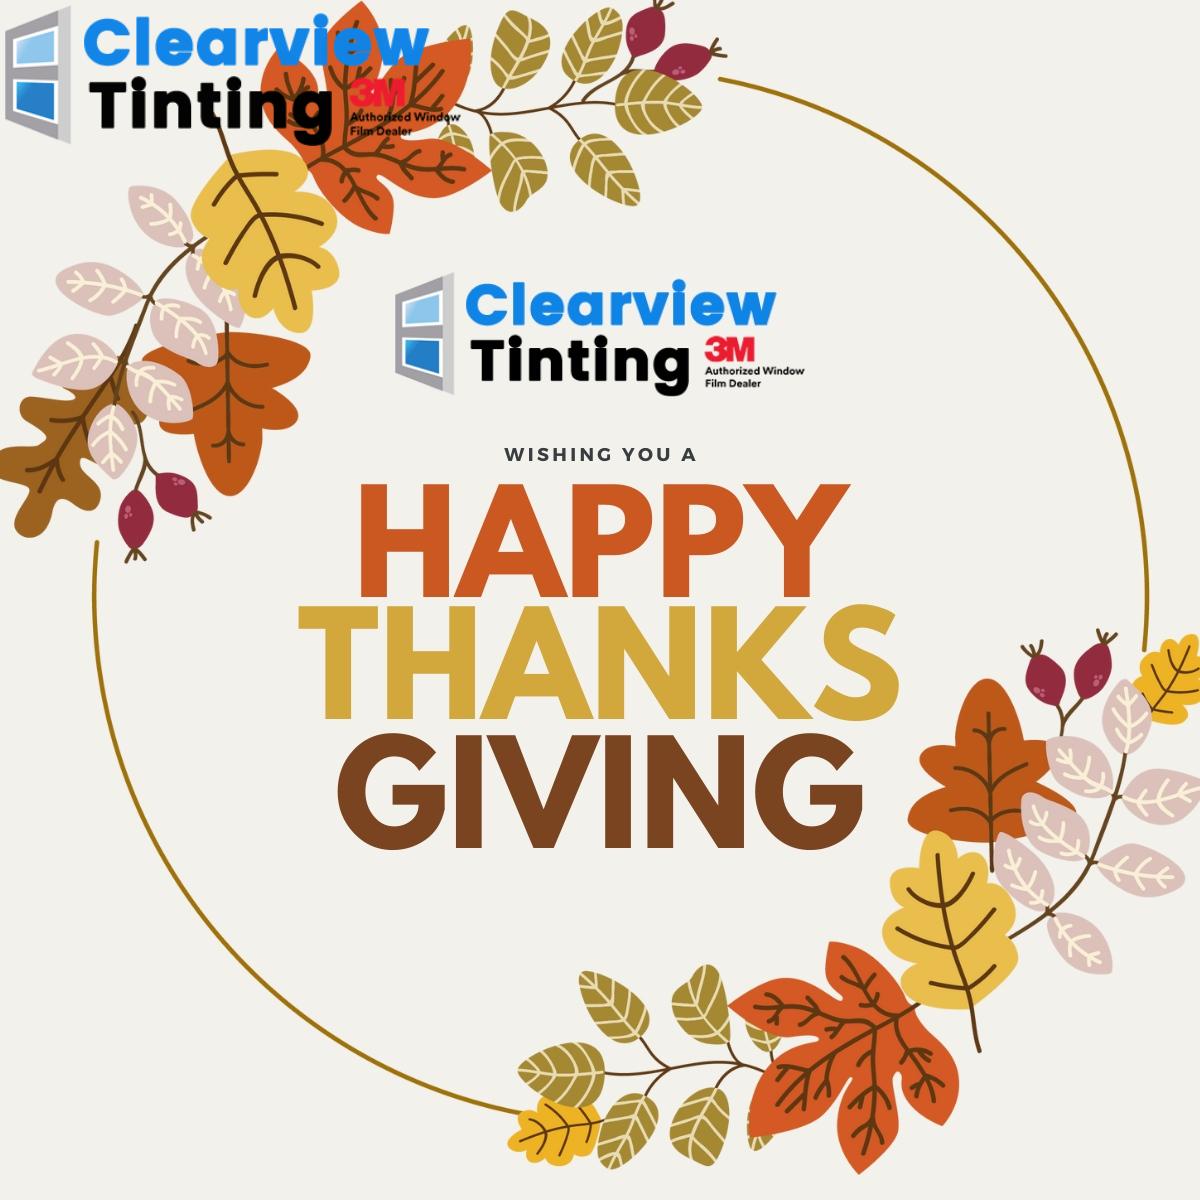 Happy Thanksgiving from the Clearview Tinting family to yours 🍂! We’ll be closed today and tomorrow to celebrate this special holiday with our families and friends. But don’t worry - we’ll be back and ready to serve the #ToledoOH and surrounding areas with quality #WindowFilm...